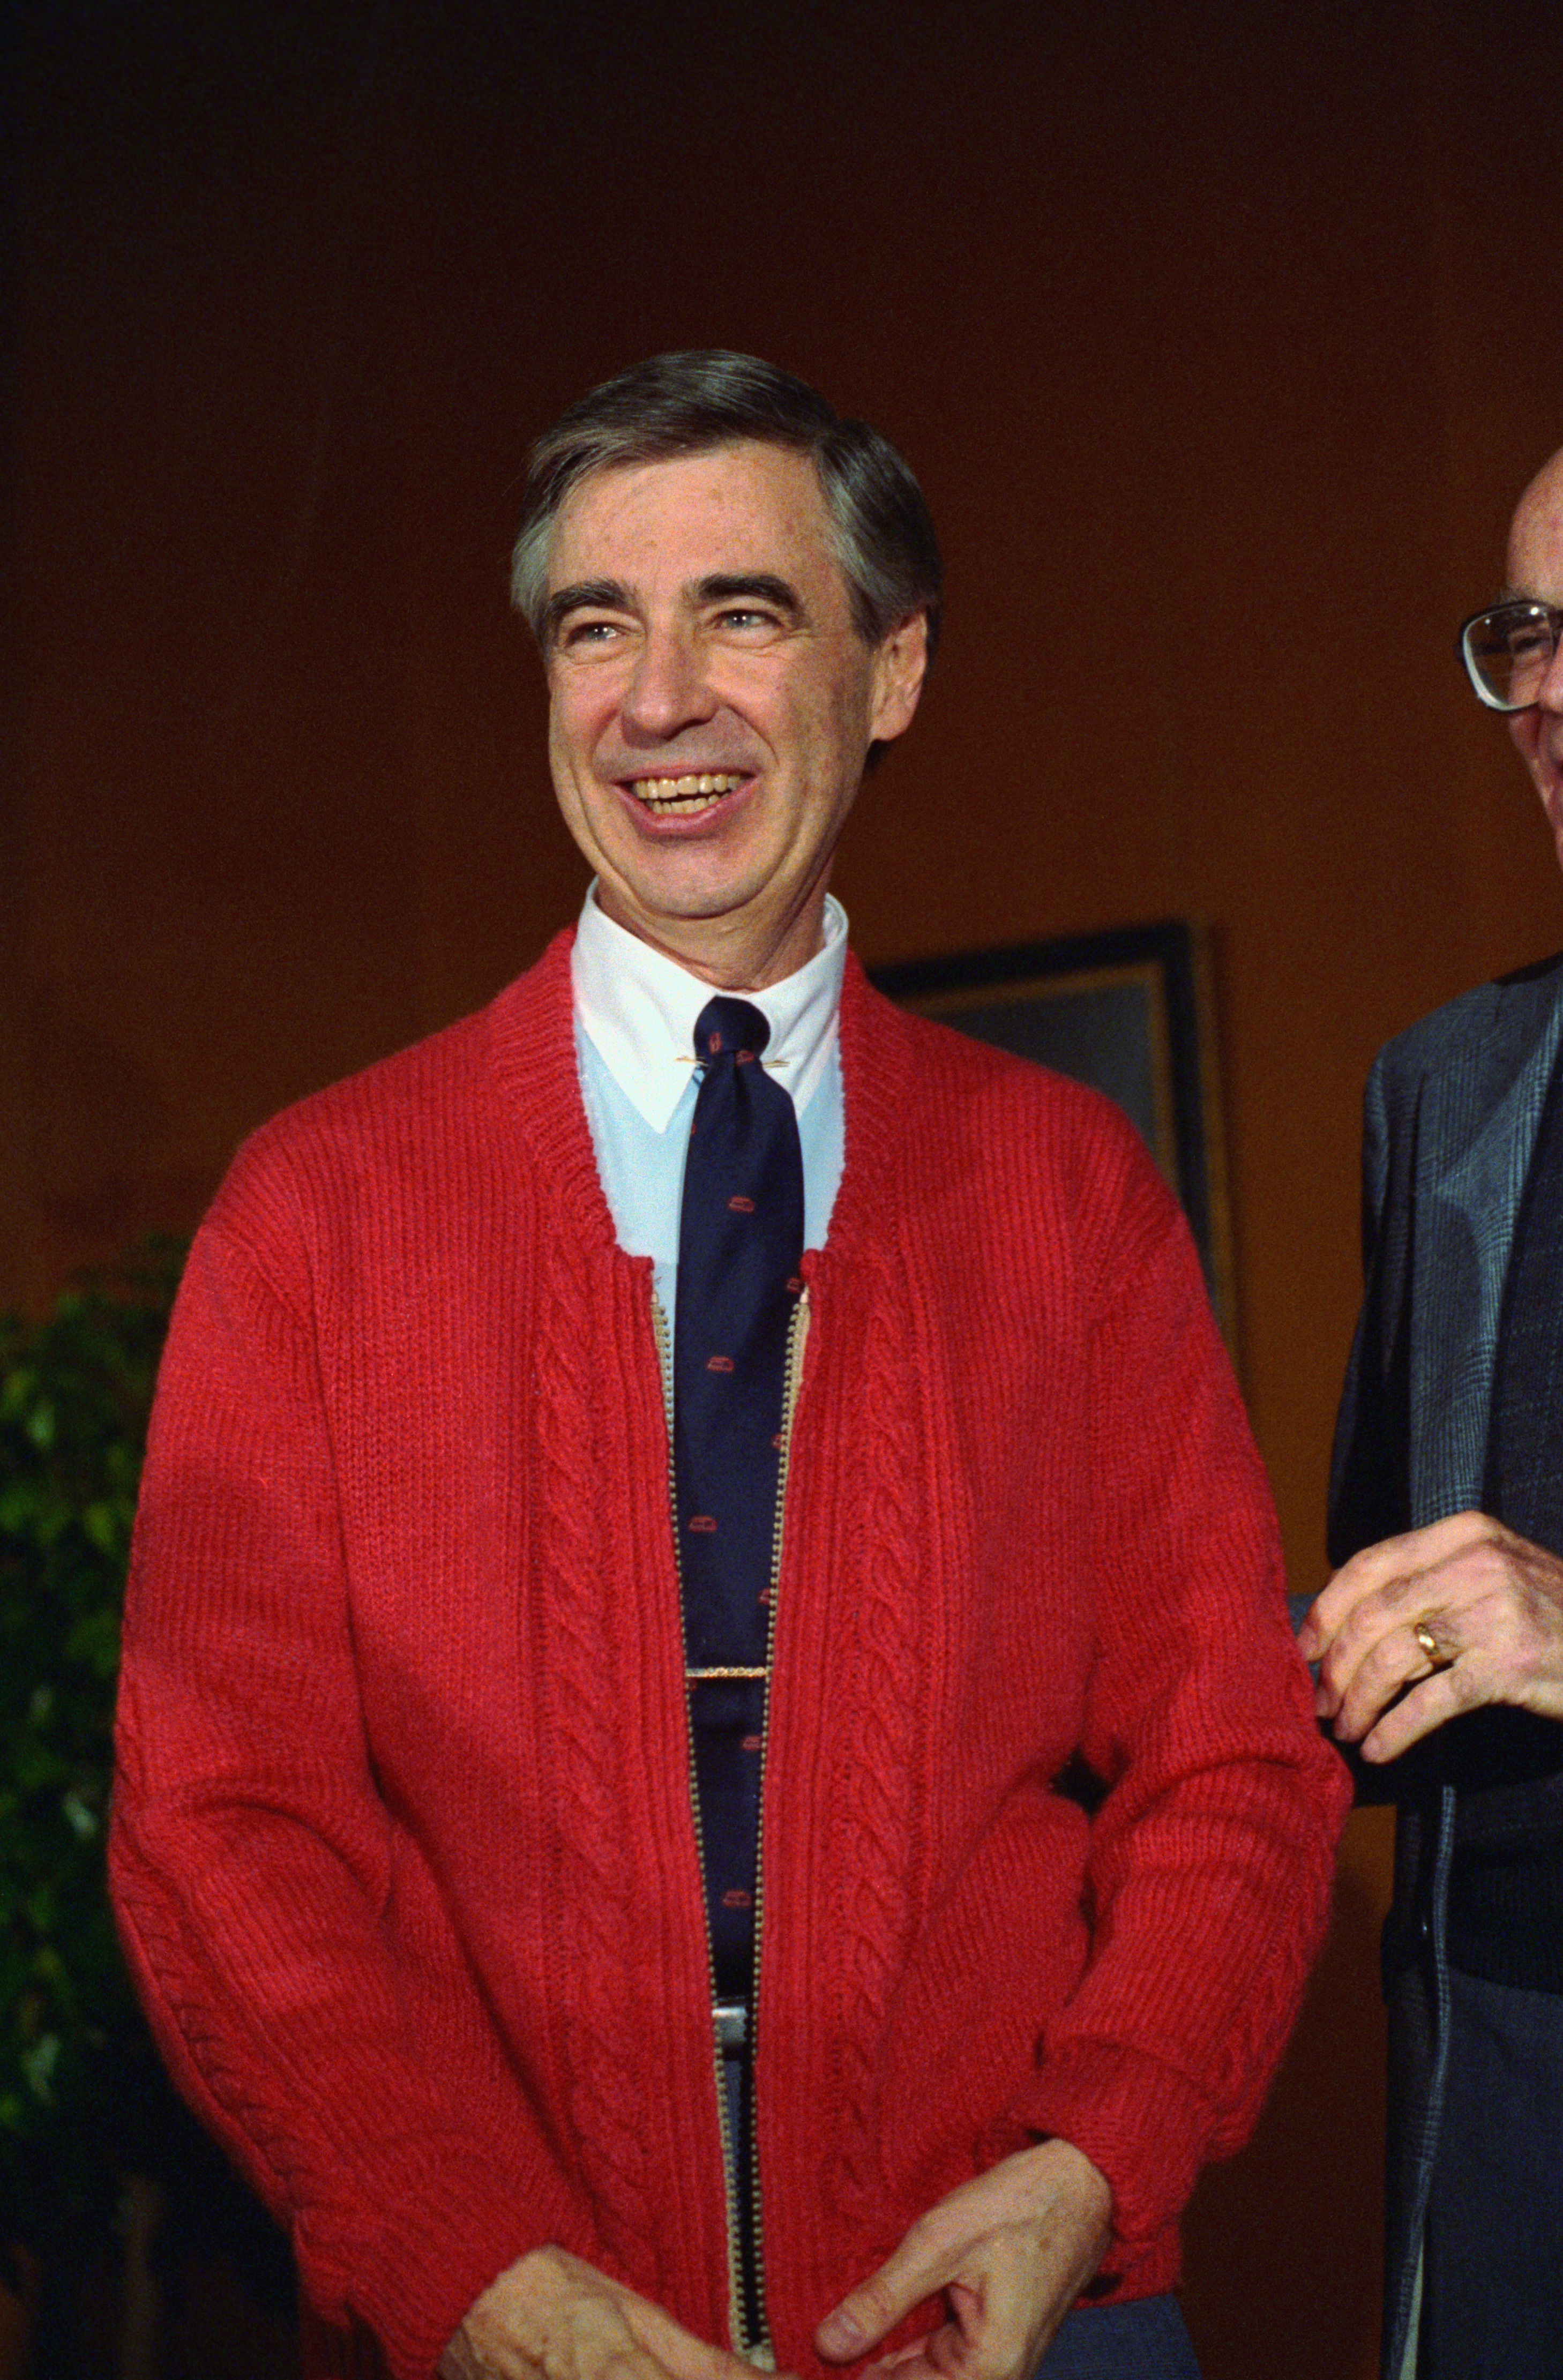 Fred Rogers Donating His Red Sweater